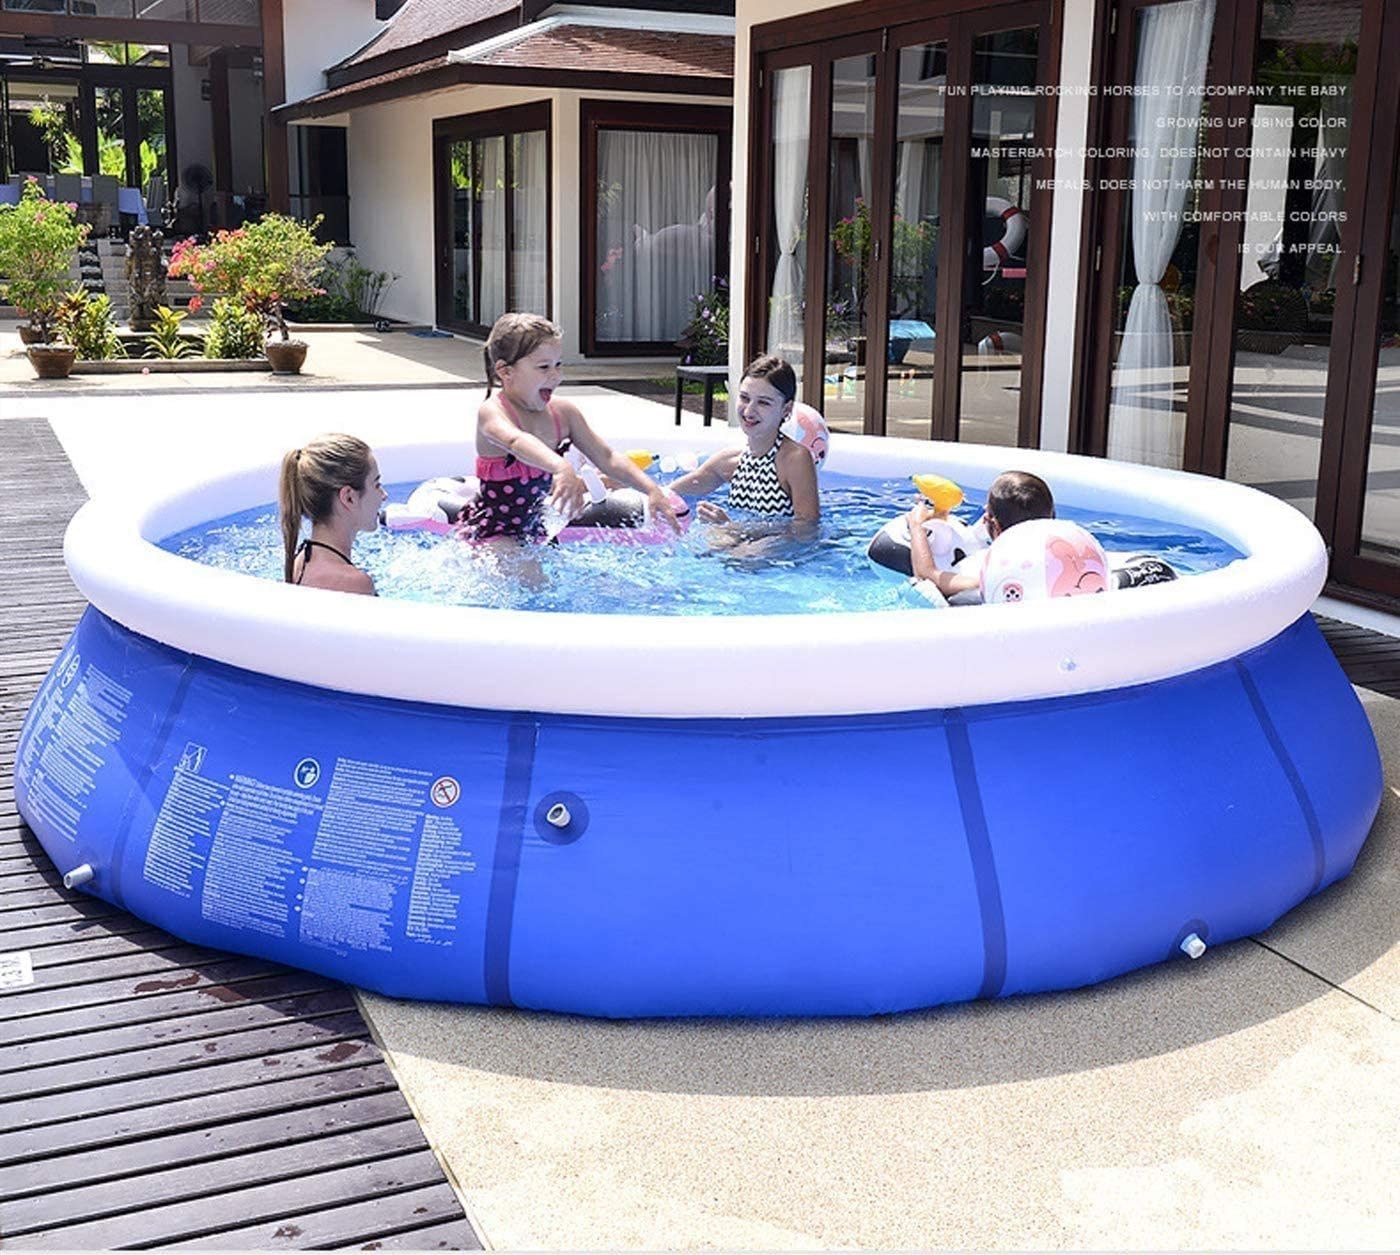 A circular family-sized pool with four people inside